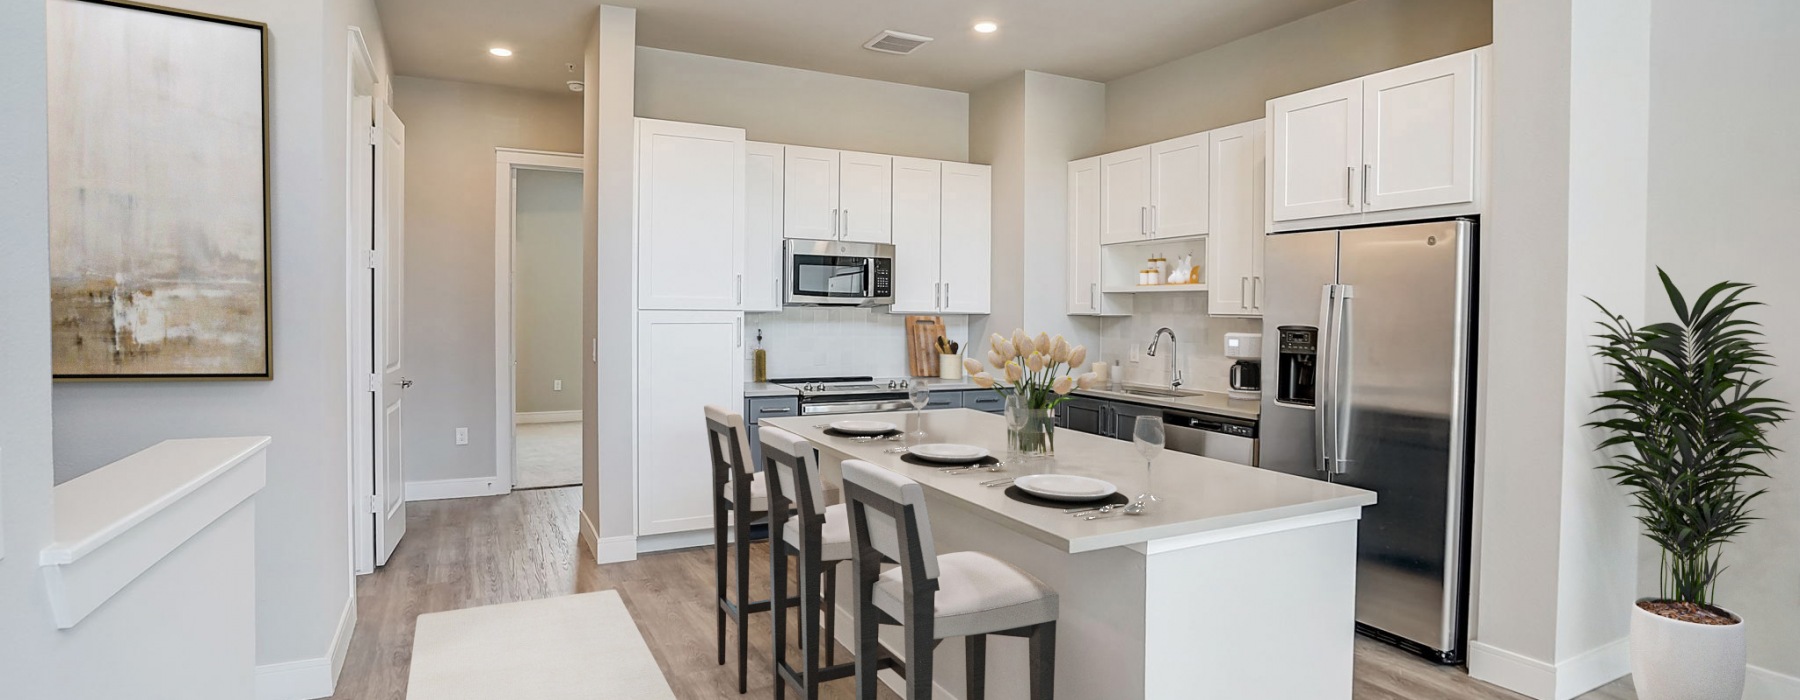 Spacious kitchen with white cabinets and stainless steel appliances